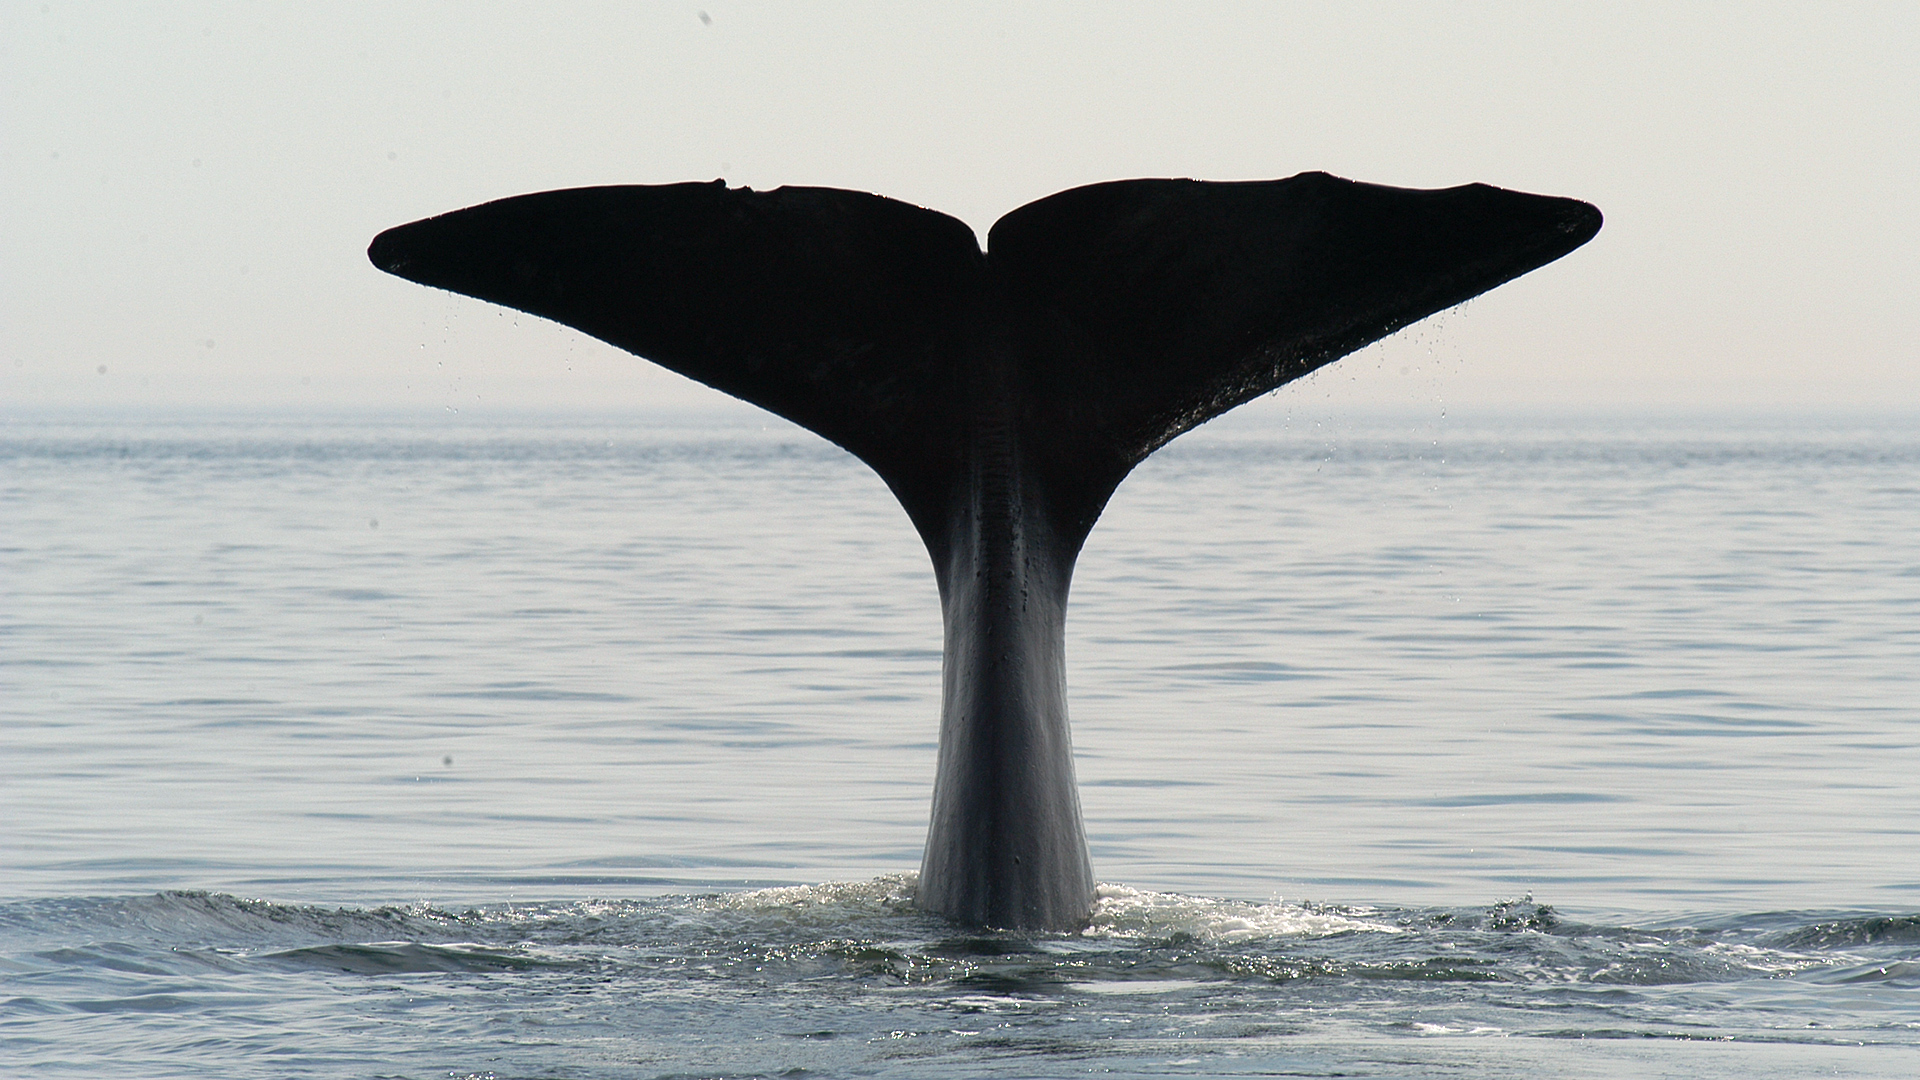 Photo of the tail of a sperm whale getting ready to take a dive.